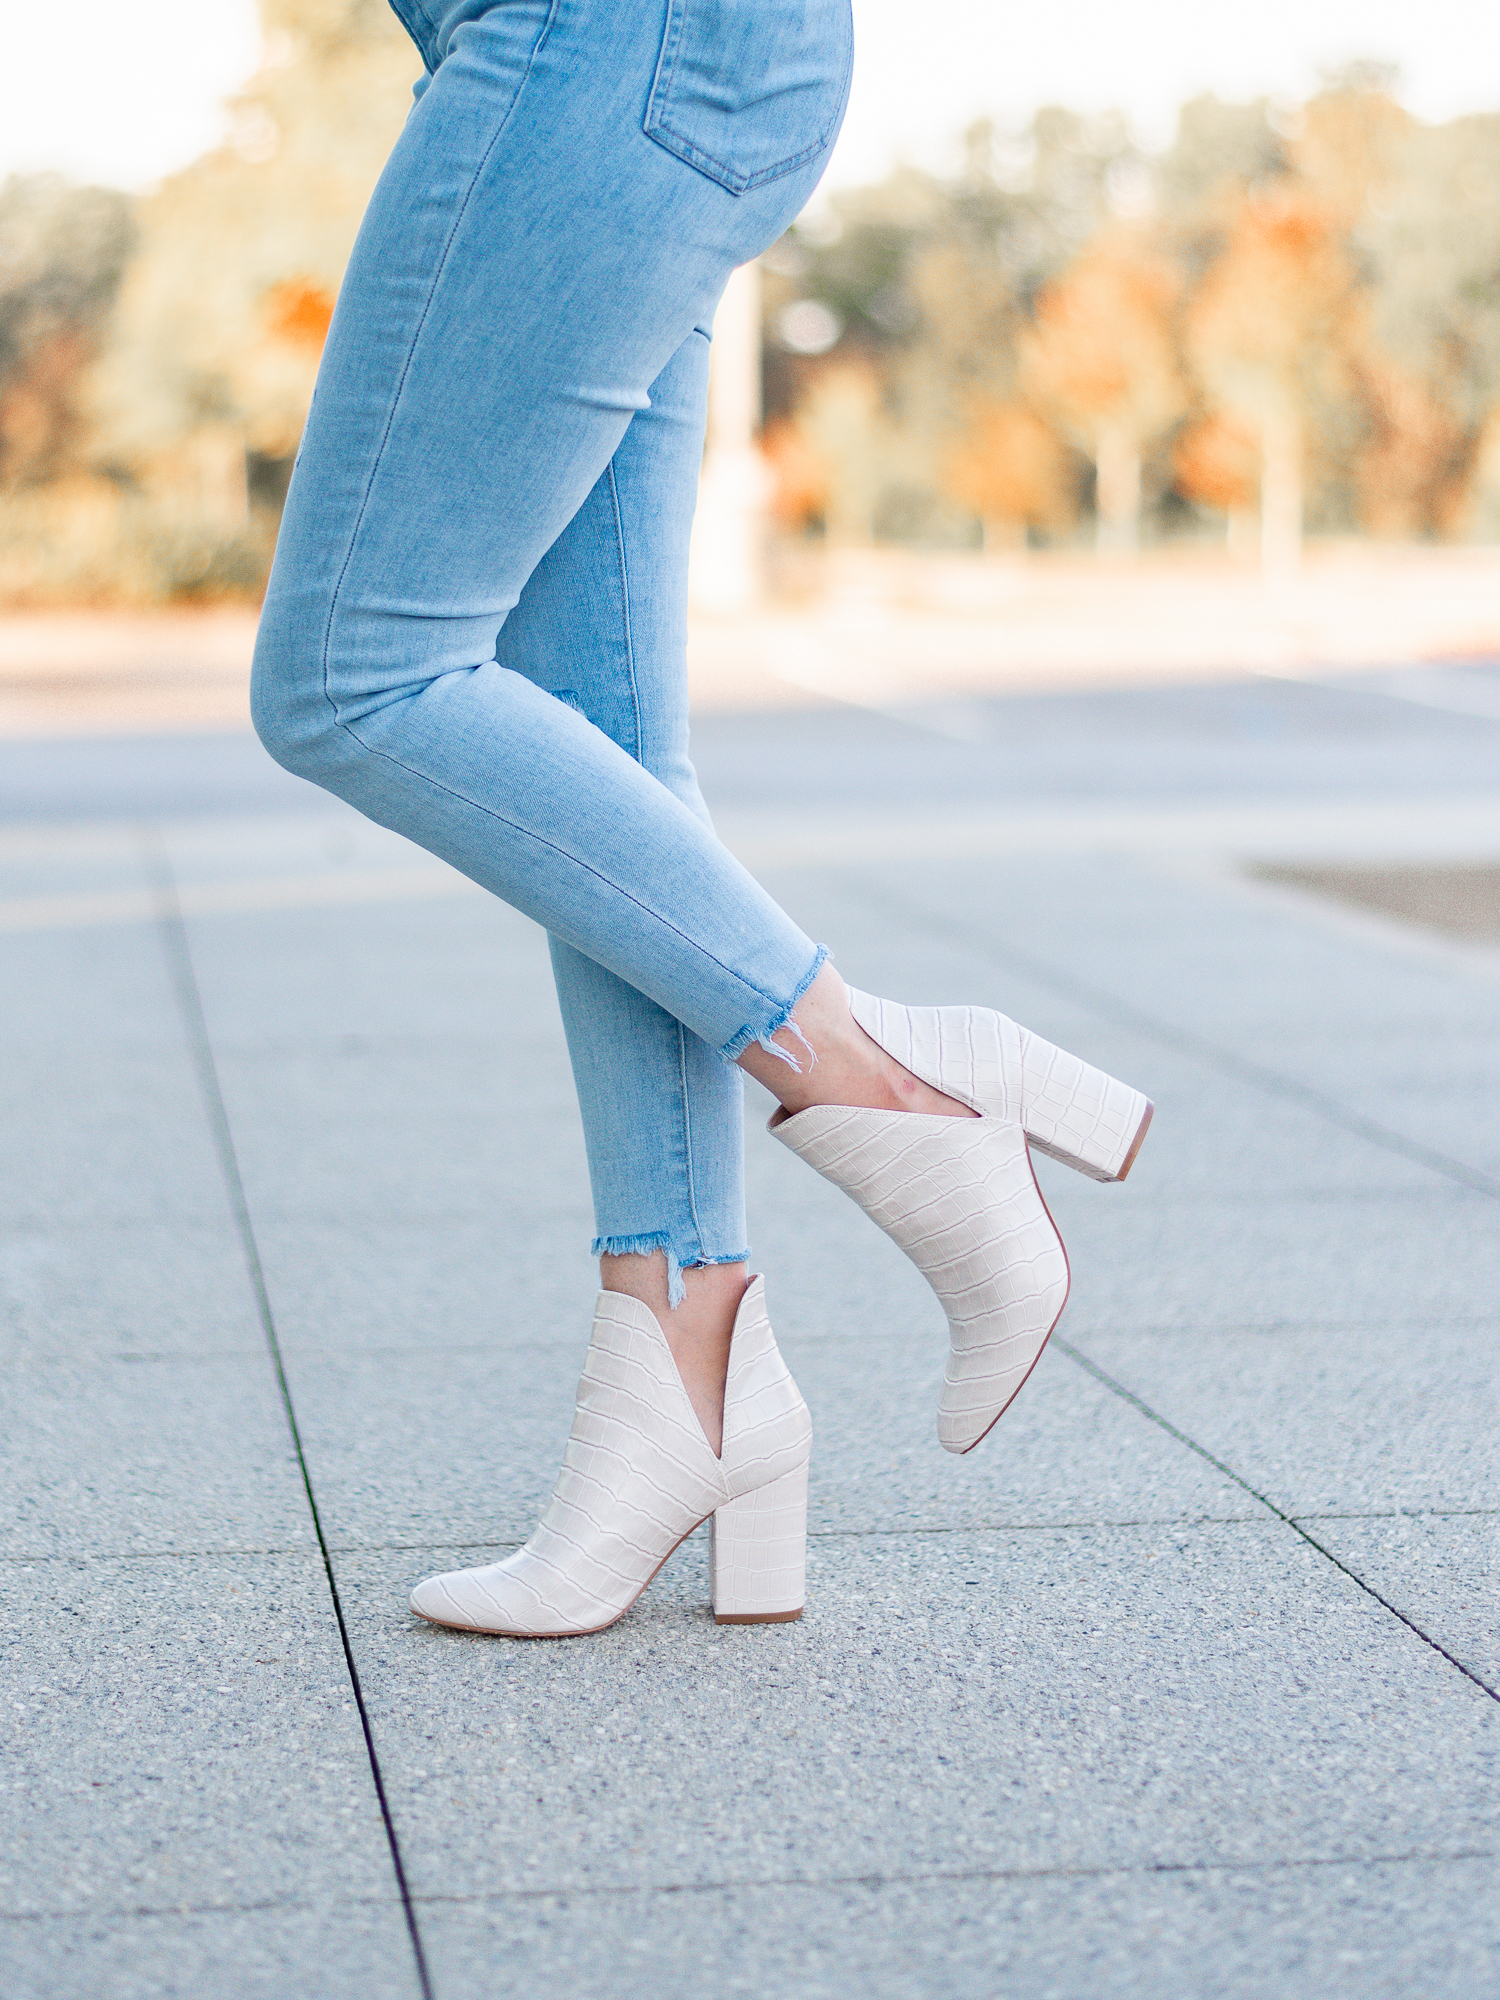 Fall outfit ideas, white croc booties, steve madden rookie booties, casual fall style, express fashion, petite denim, petite styles from Amazon, budget friendly fashion, fall fashion from amazon, Atlanta Style Bloggers